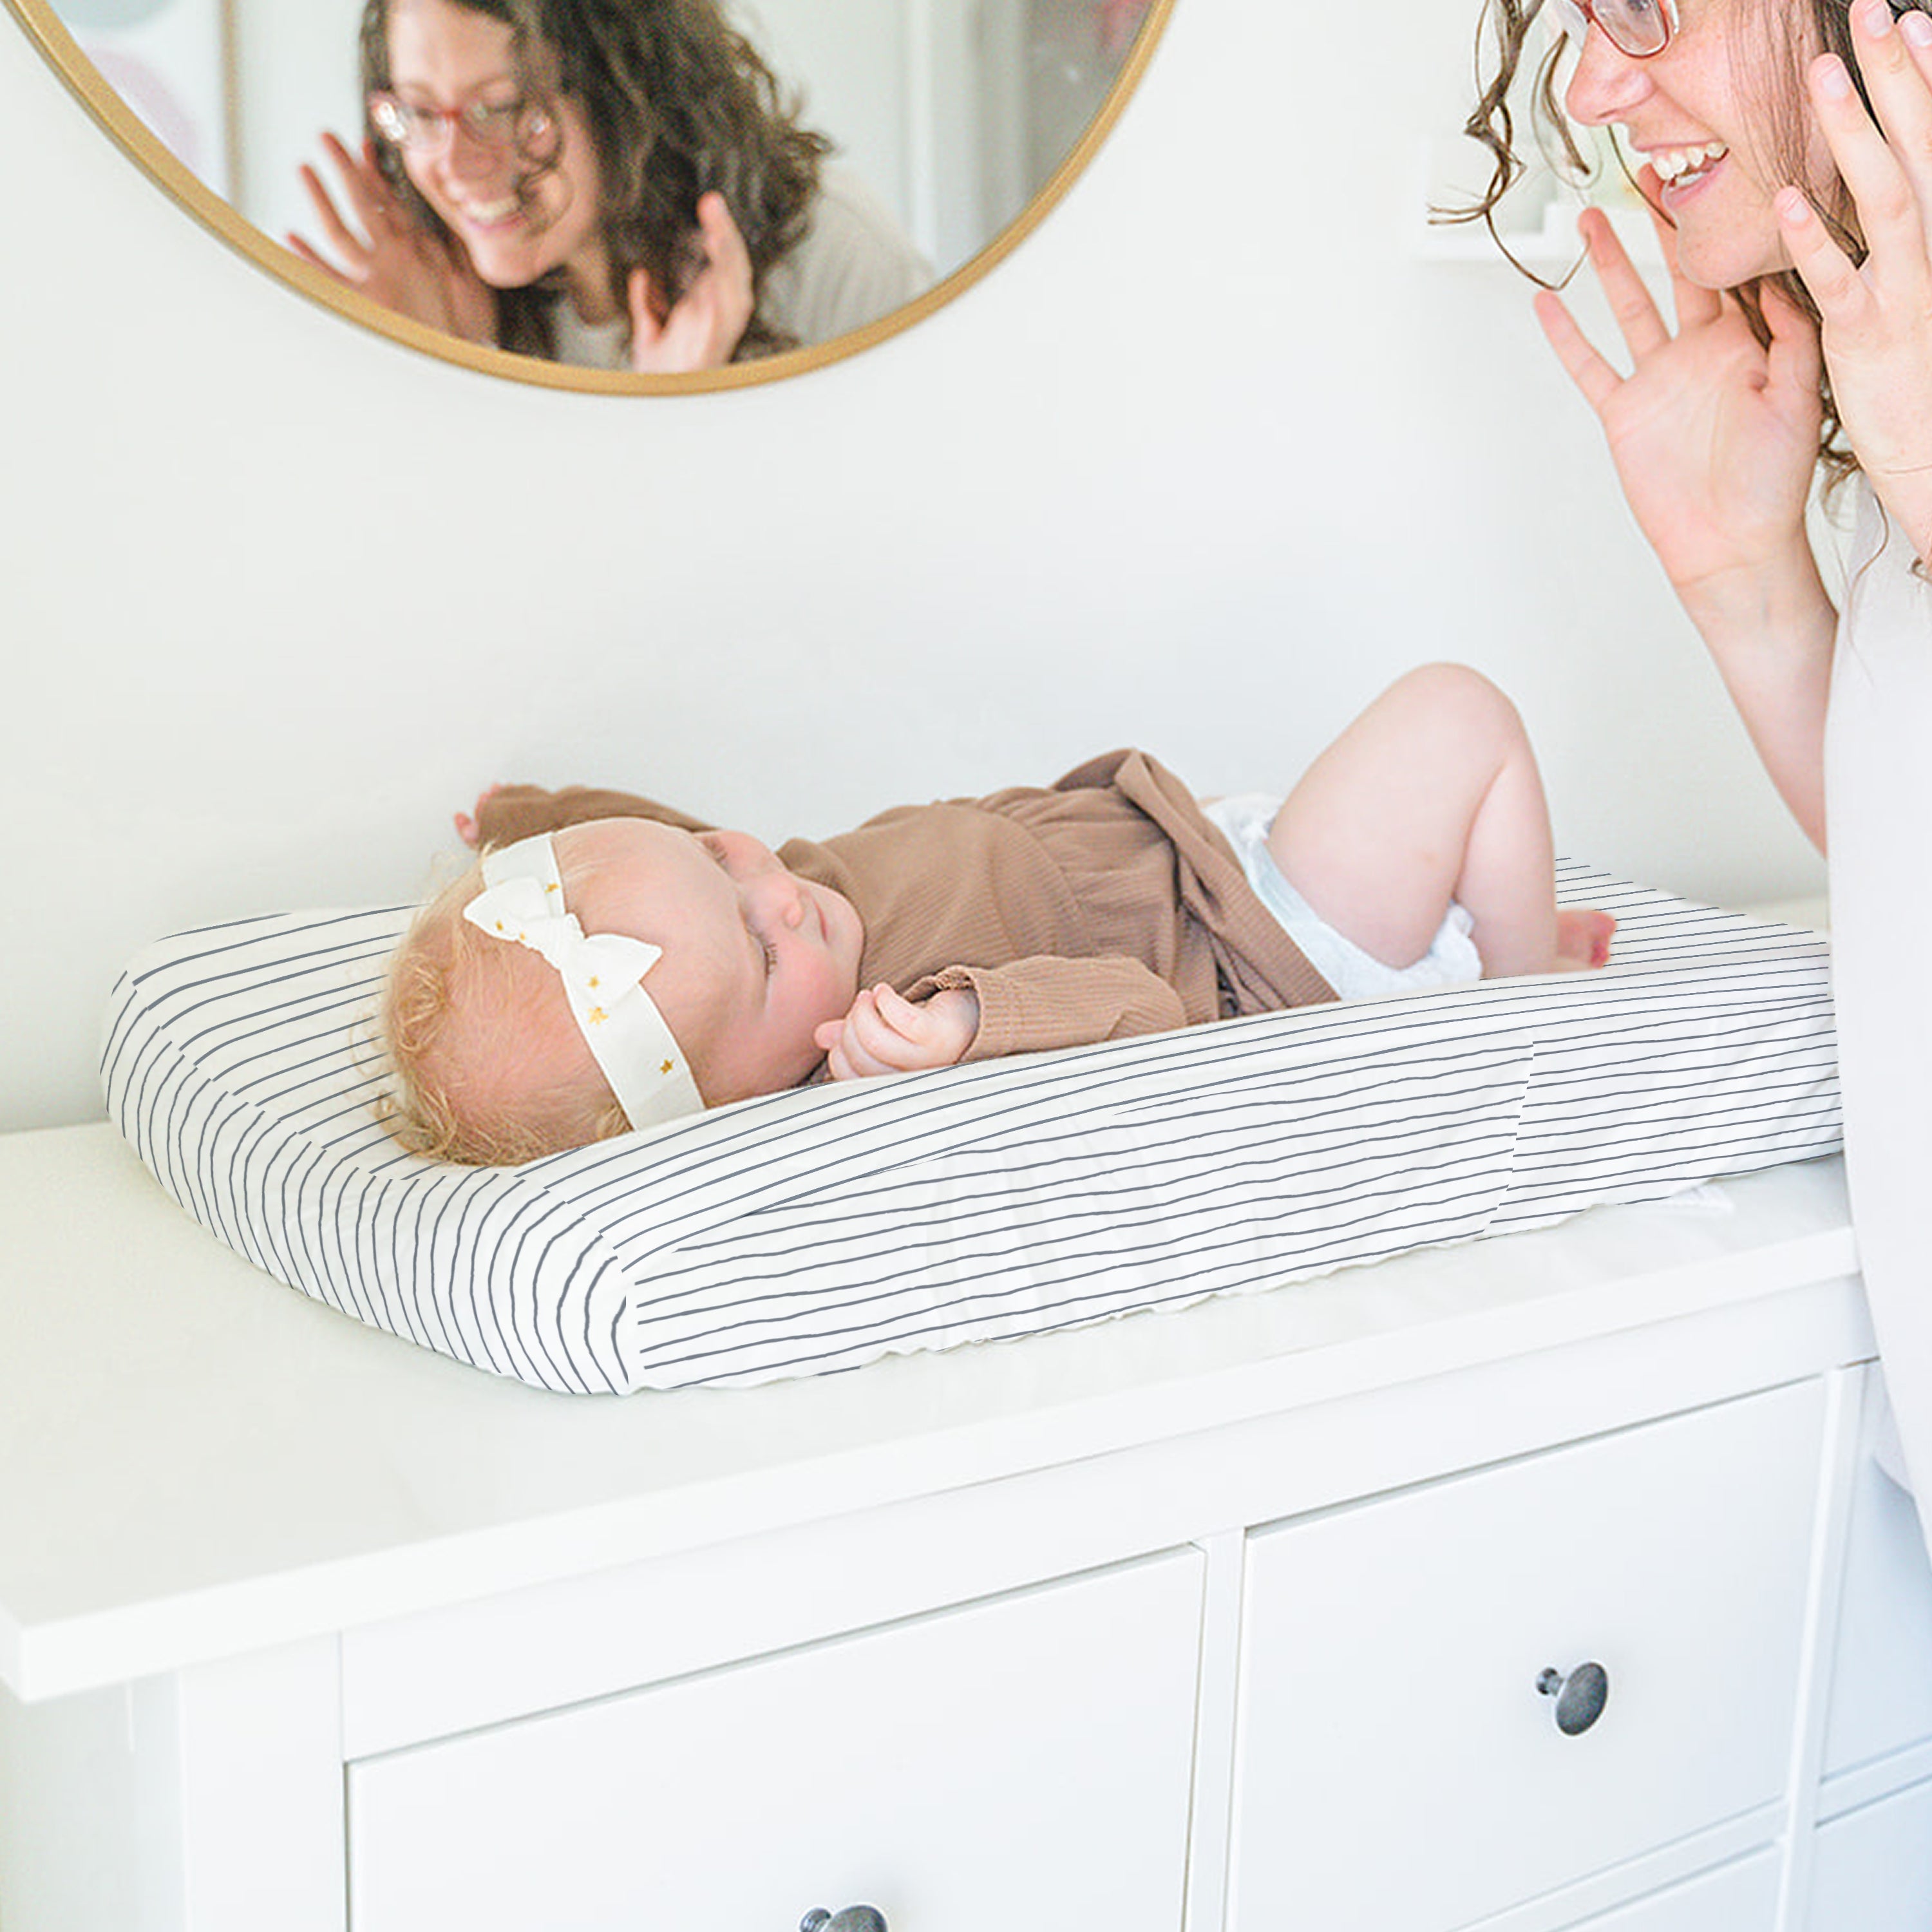 A joyful mother interacts playfully with her baby lying on a Makemake Organics Organic Cotton Changing Pad Cover - Navy Stripes, with their reflection visible in a circular mirror above them.